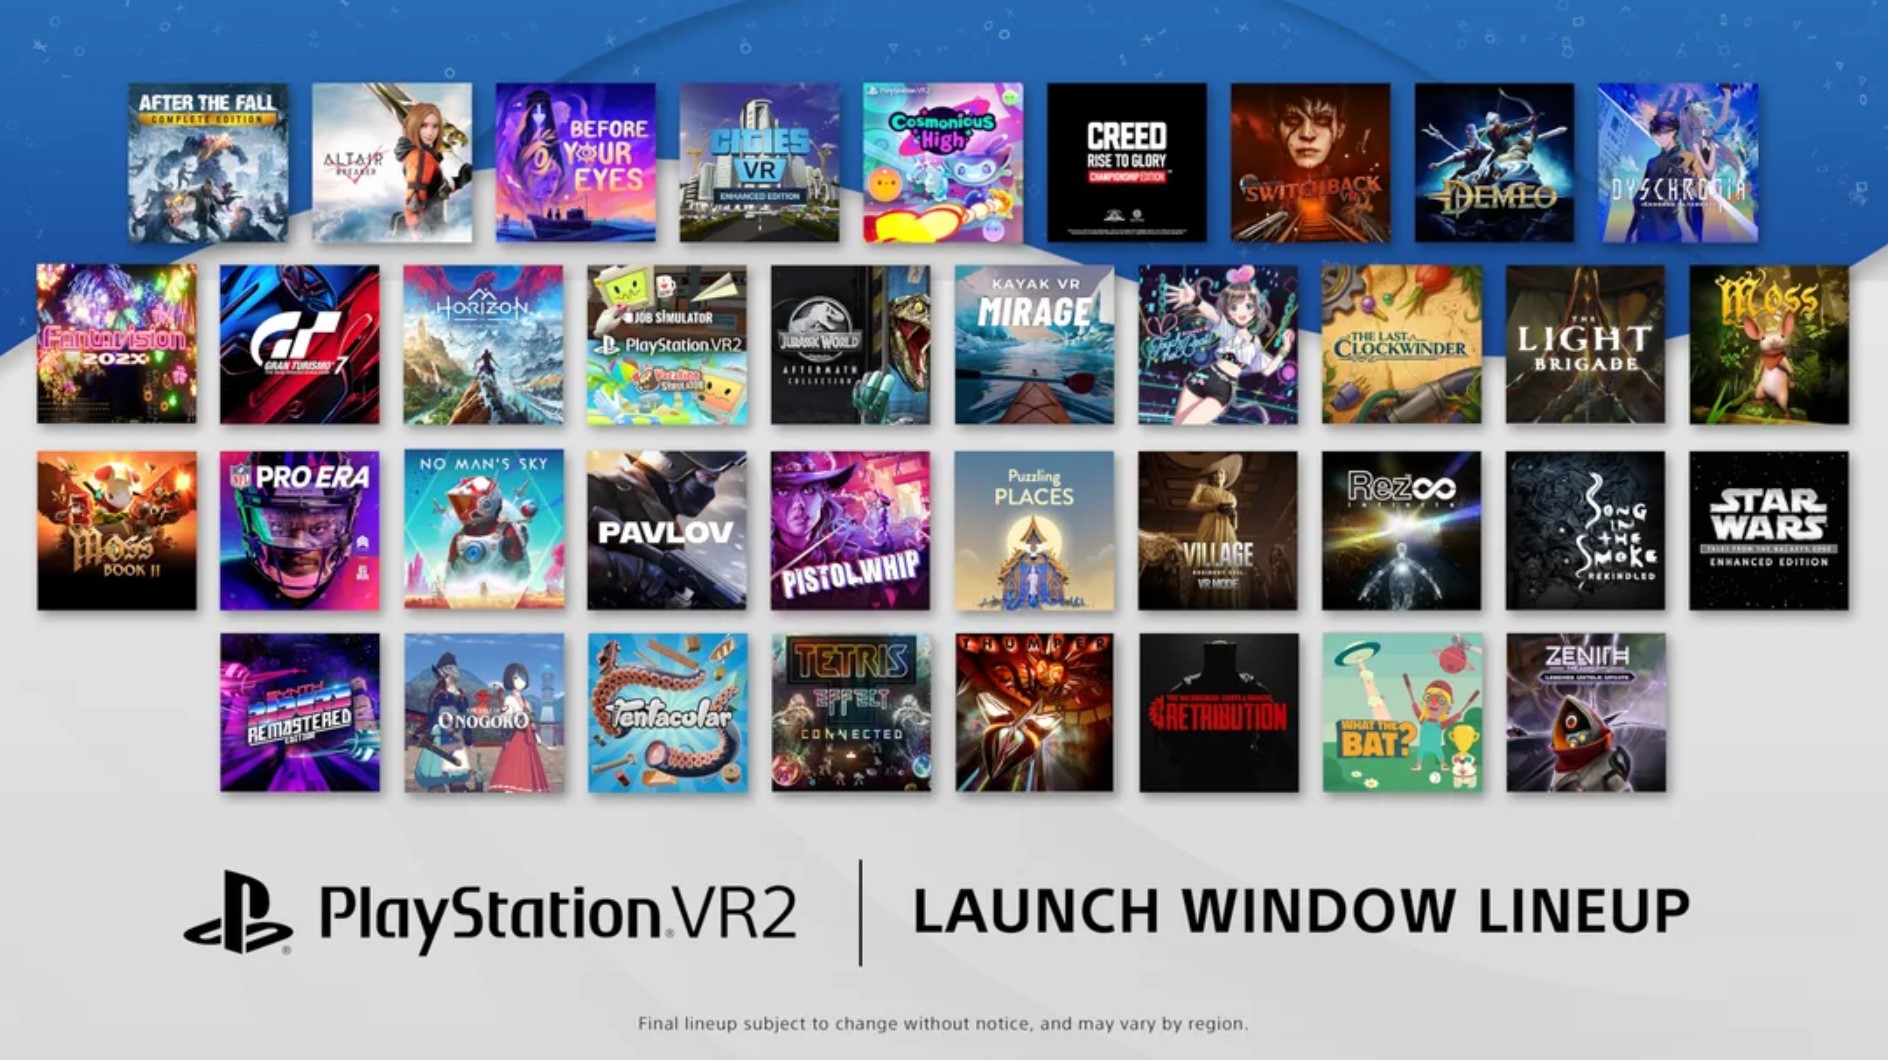 Sony announces ten more launch window titles for Playstation VR 2